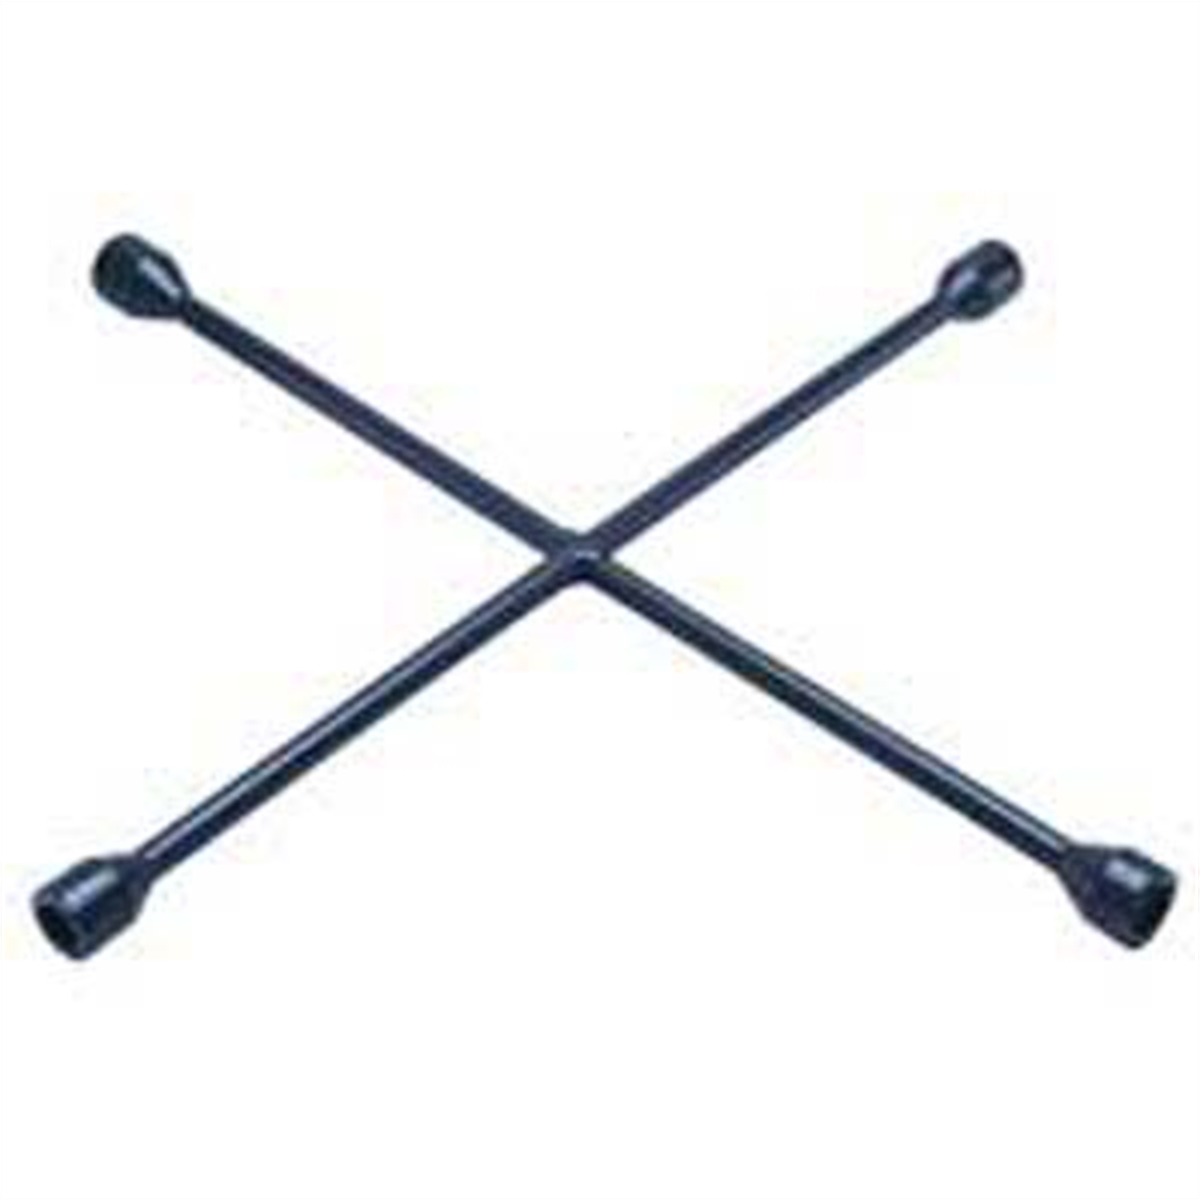 NutBuster Four-Way Light Truck/RV Lug Wrench - 23 In